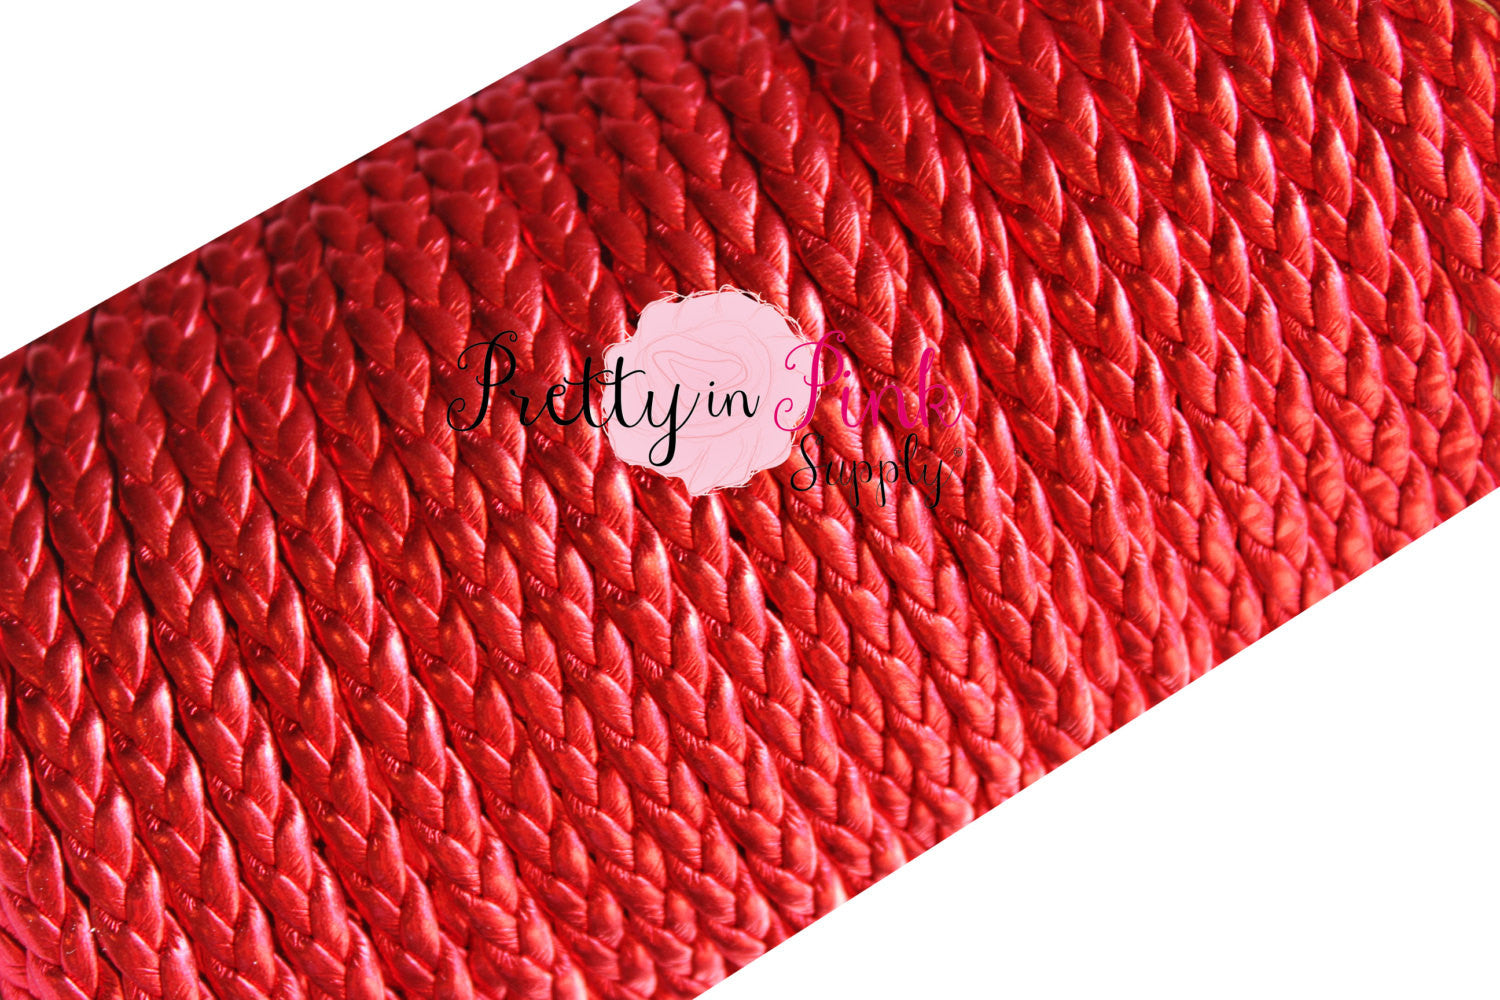 Red Metallic Braided Leather Cord - Pretty in Pink Supply